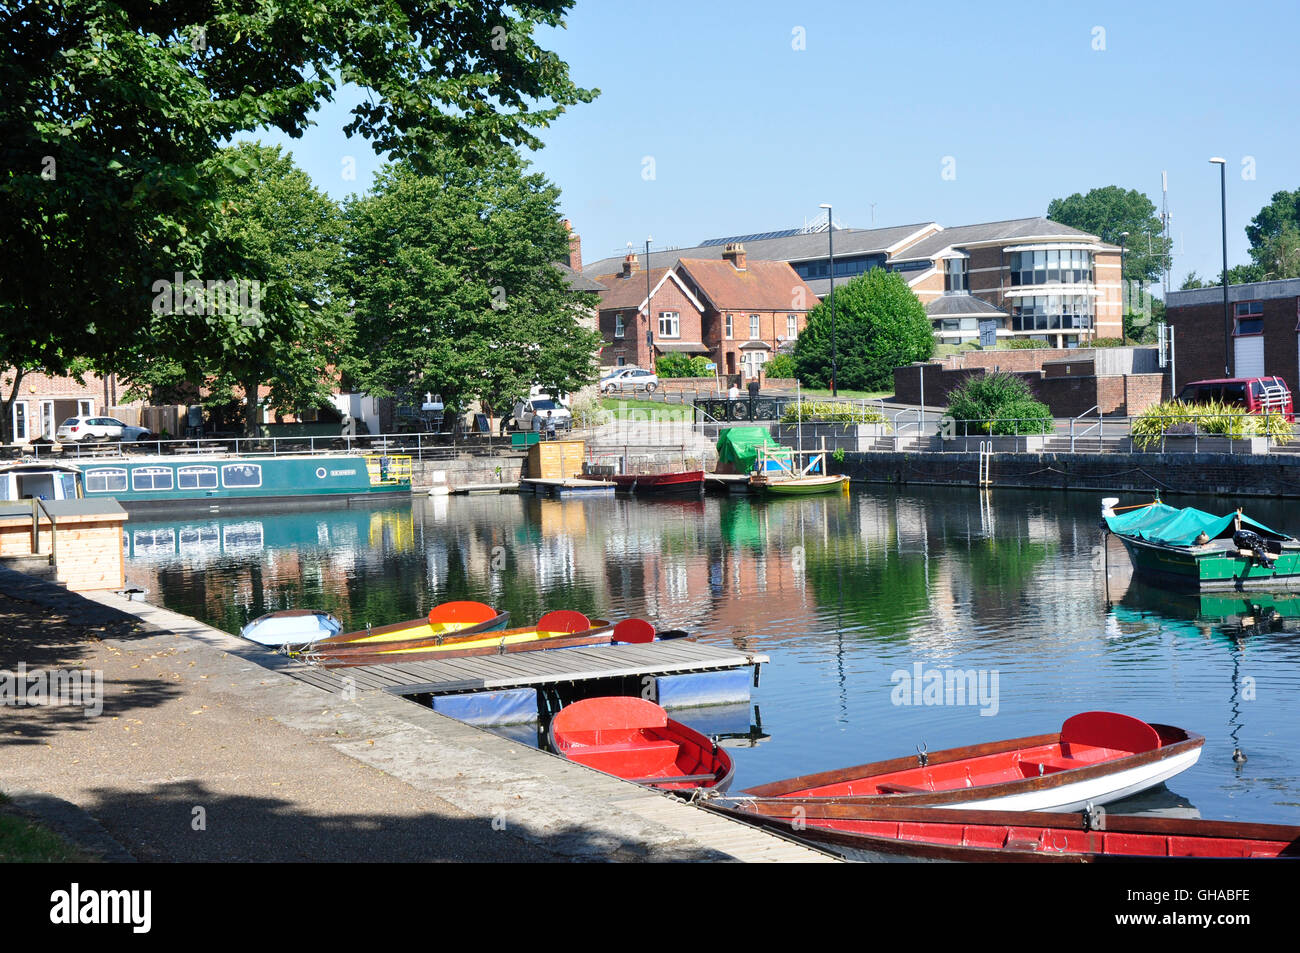 Hampshire - Chichester canal basin - colourful pleasure boats moored - sunlight and shadows - reflections-town skyline backdrop Stock Photo